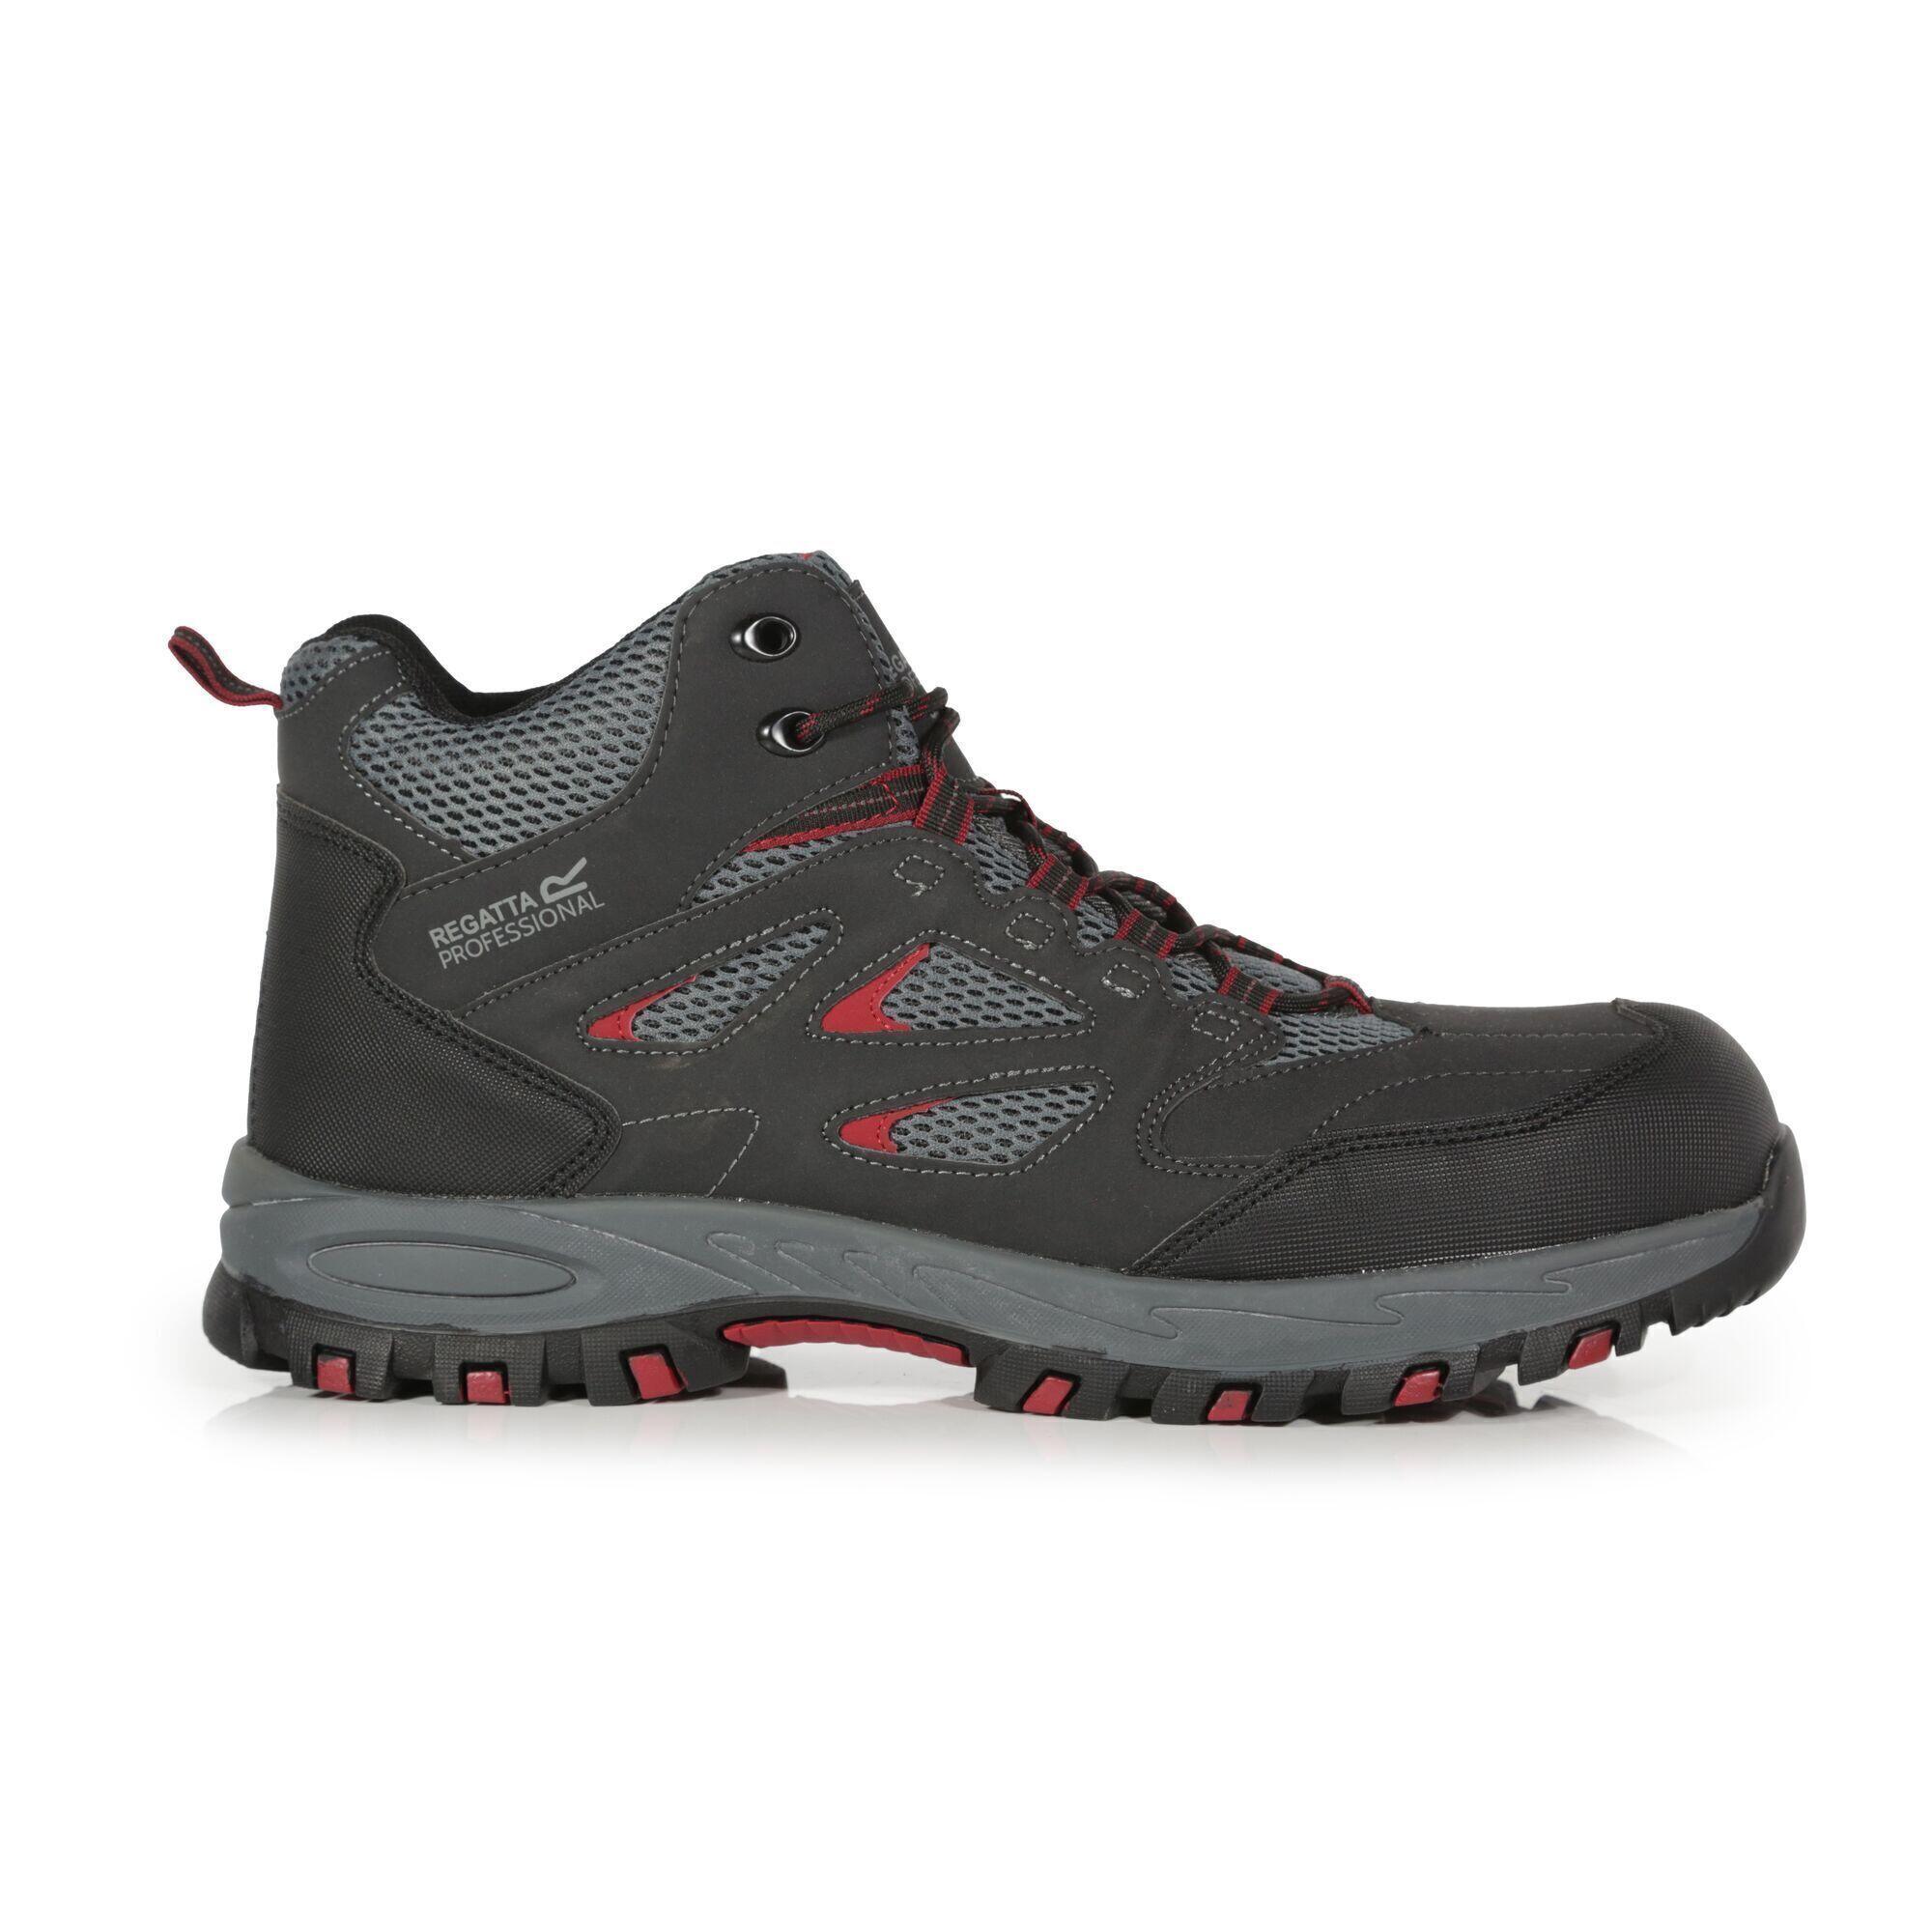 Mens Mudstone Safety Boots (Ash/Rio Red) 4/5